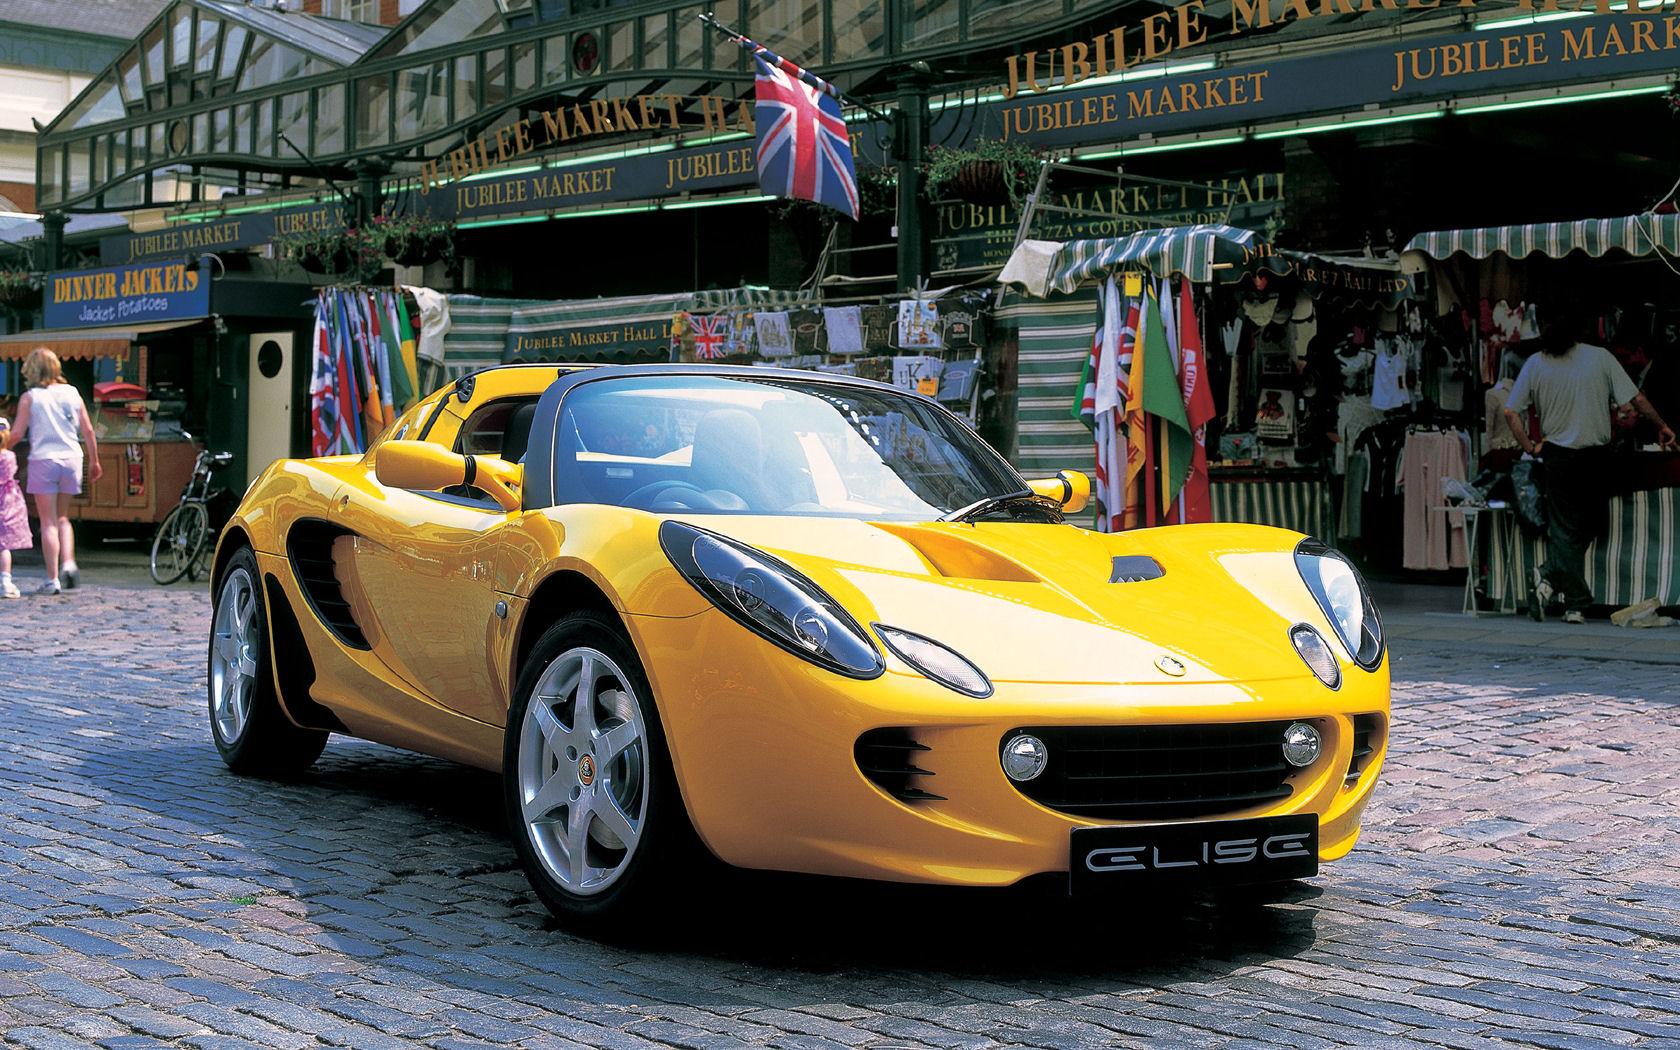 Lotus Elise, SC Supercharged, 111R Widescreen Wallpaper